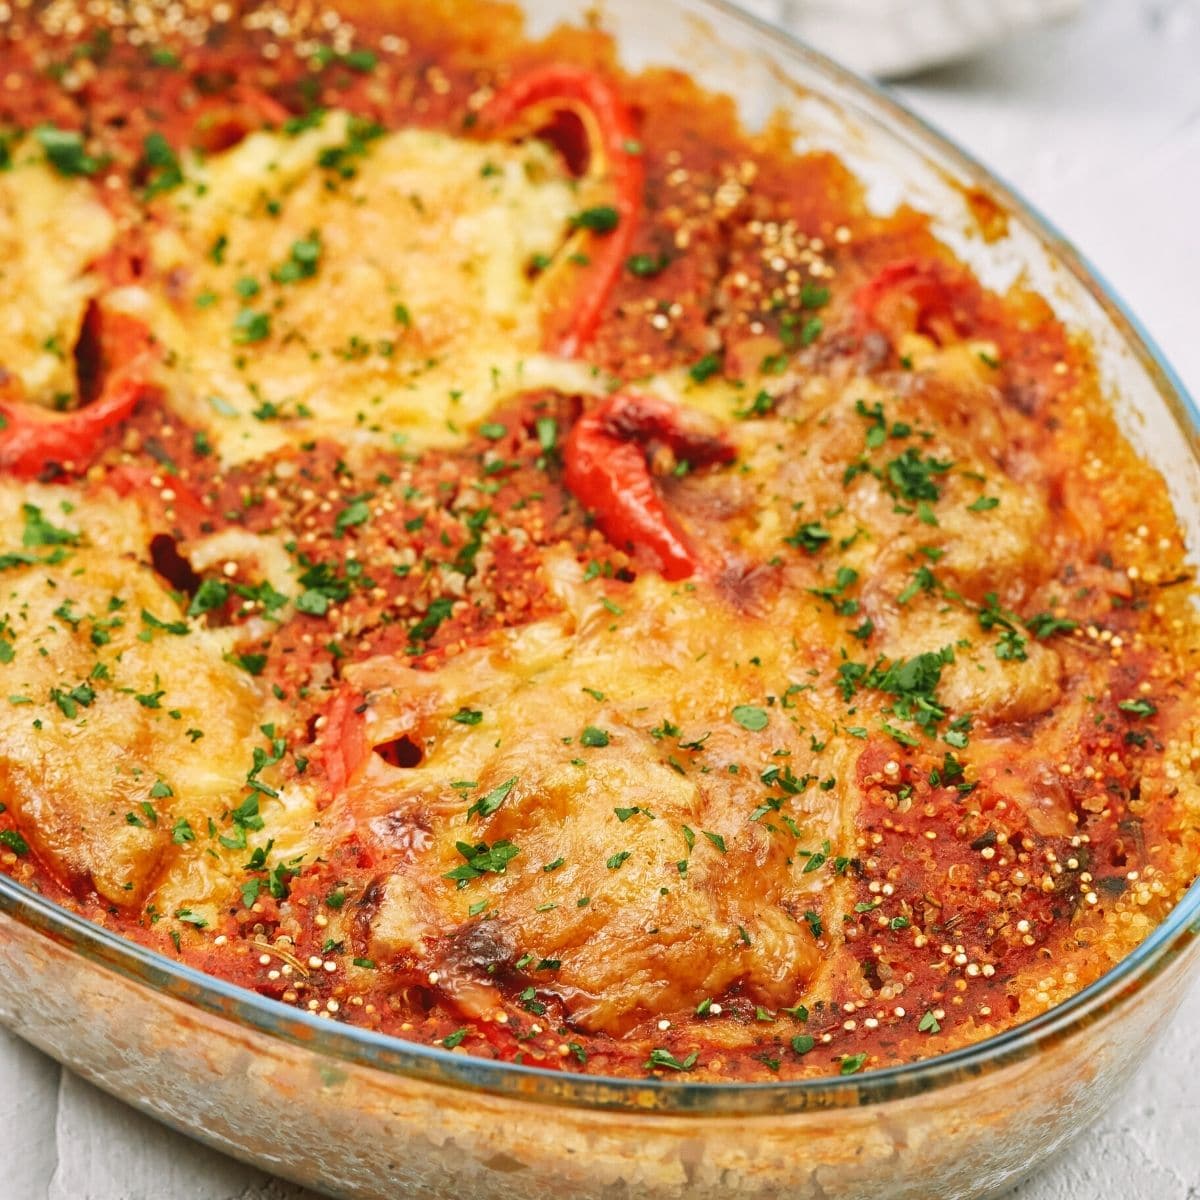 Stuffed pepper casserole freshly baked in a transparent dish.